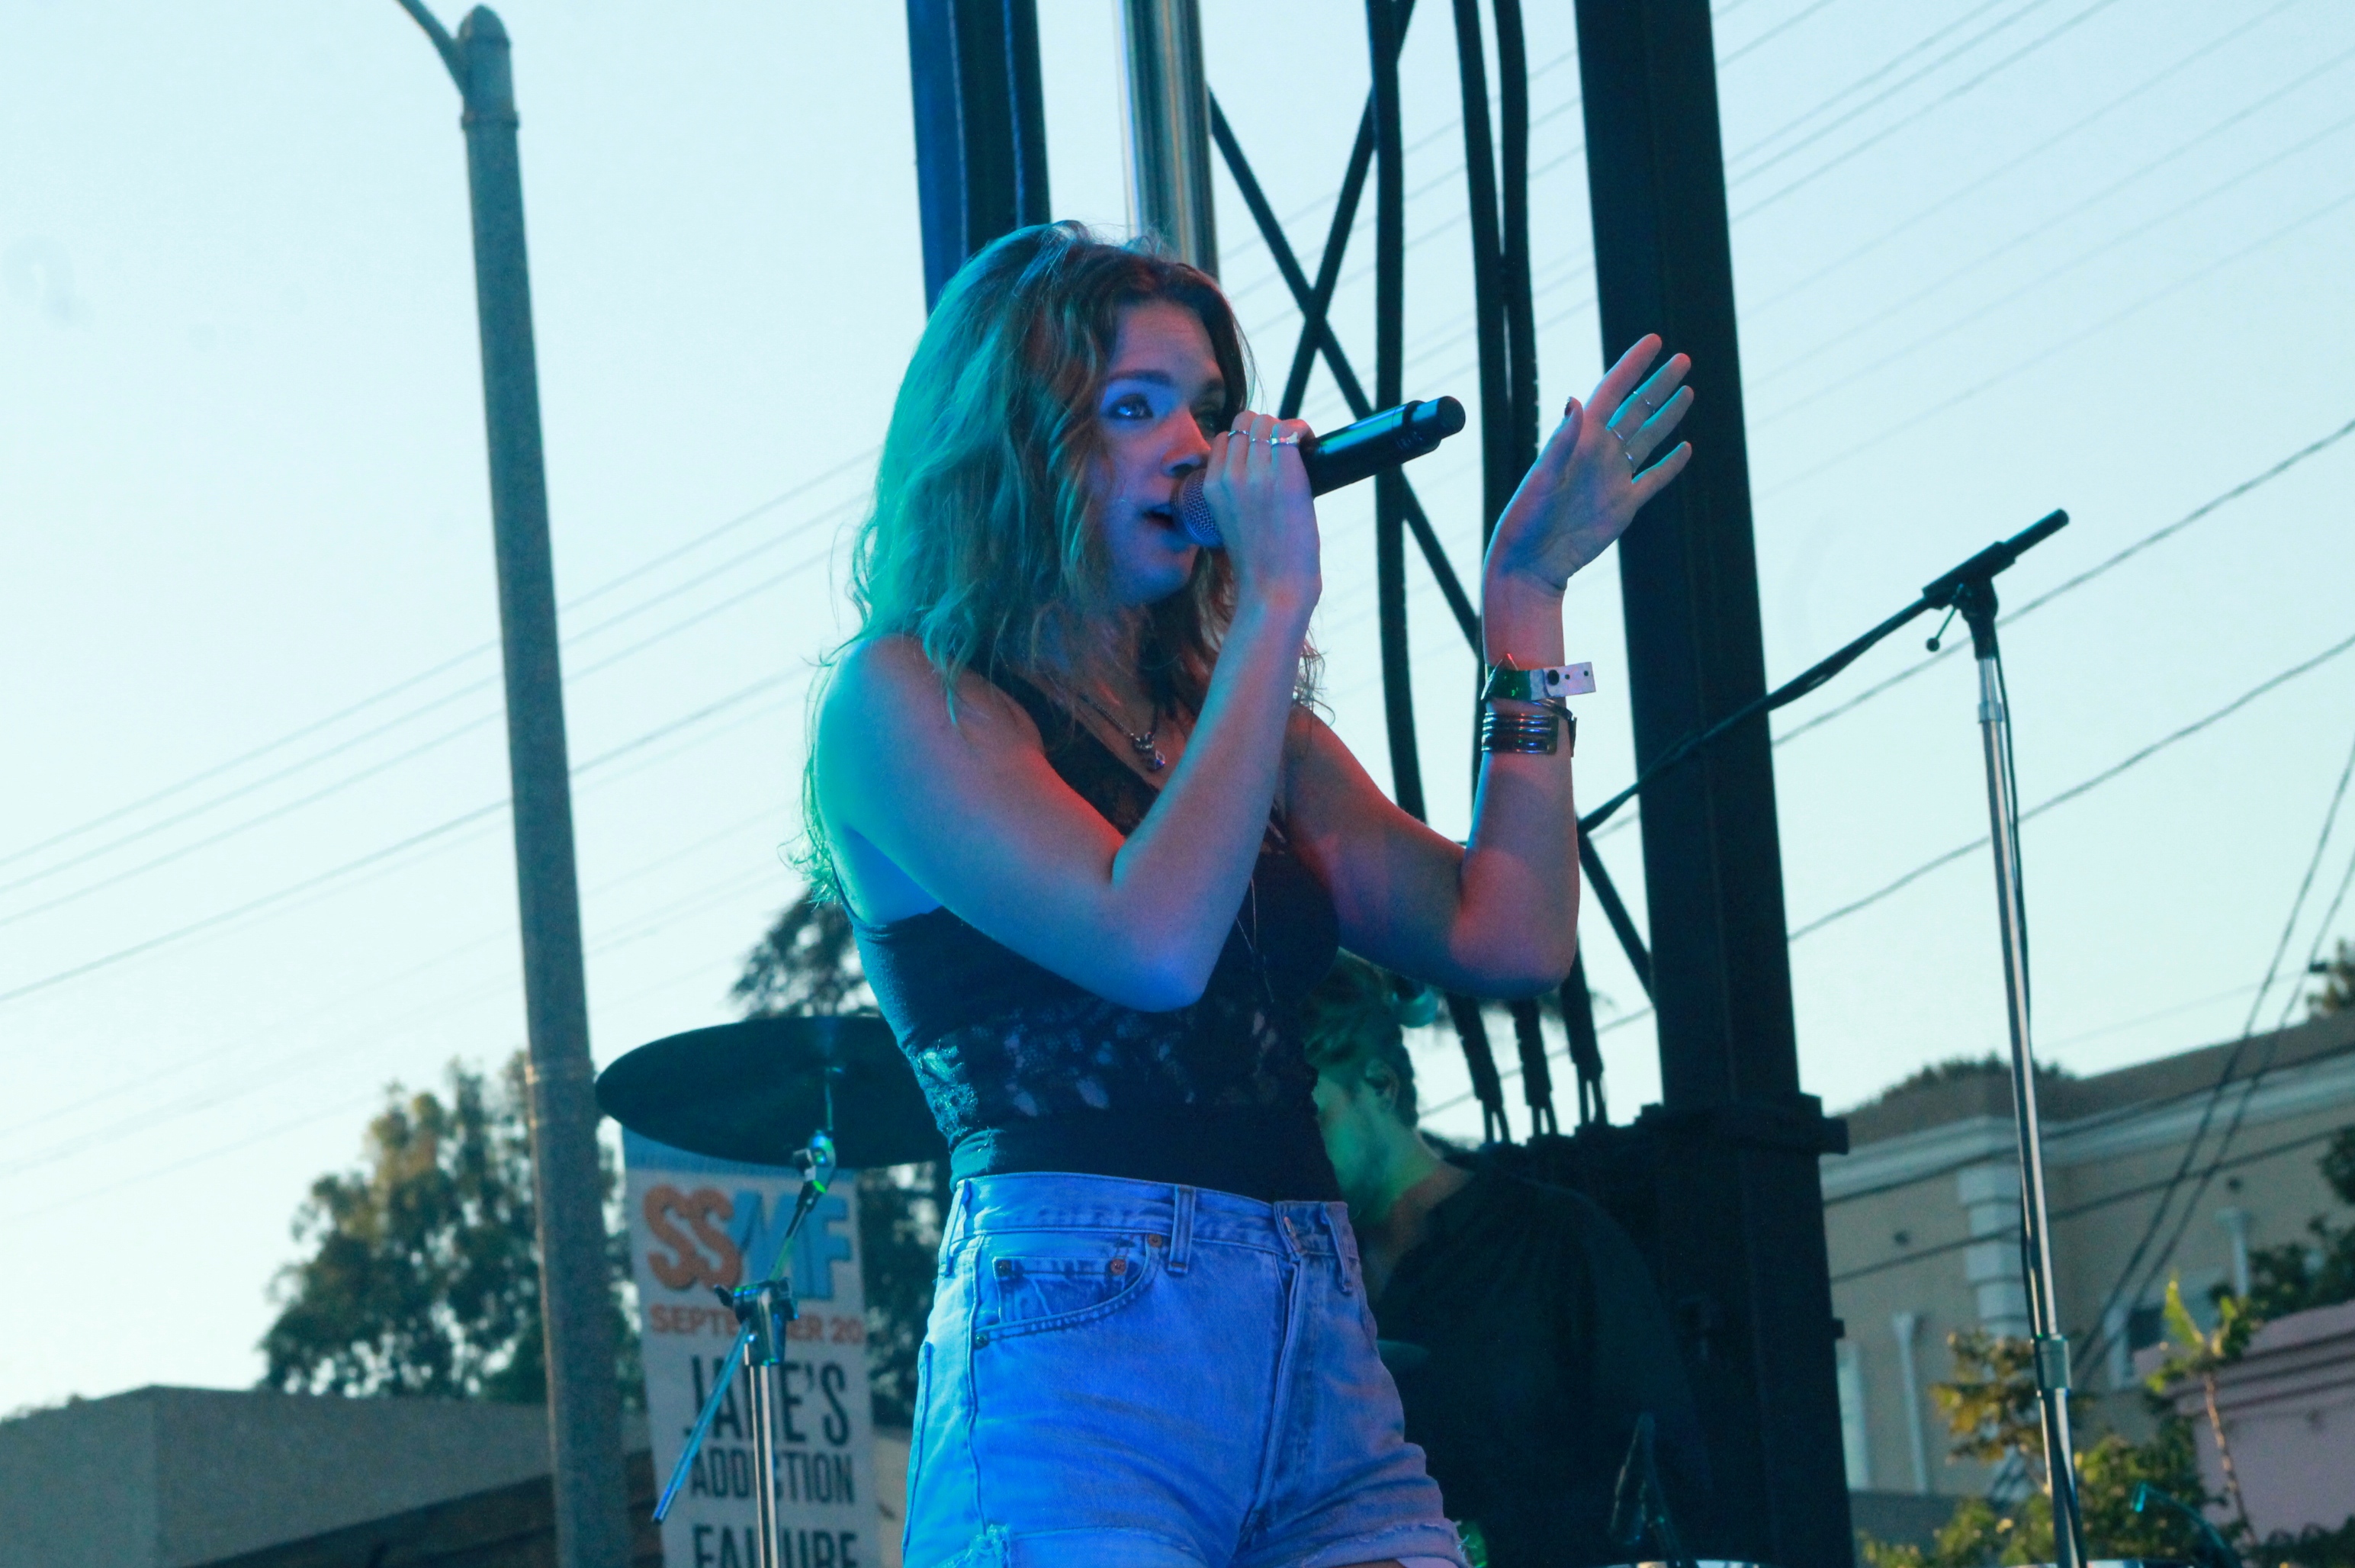 Tove Lo Debuts New Song "The Struggle" at Coachella, Promises Lady Wood